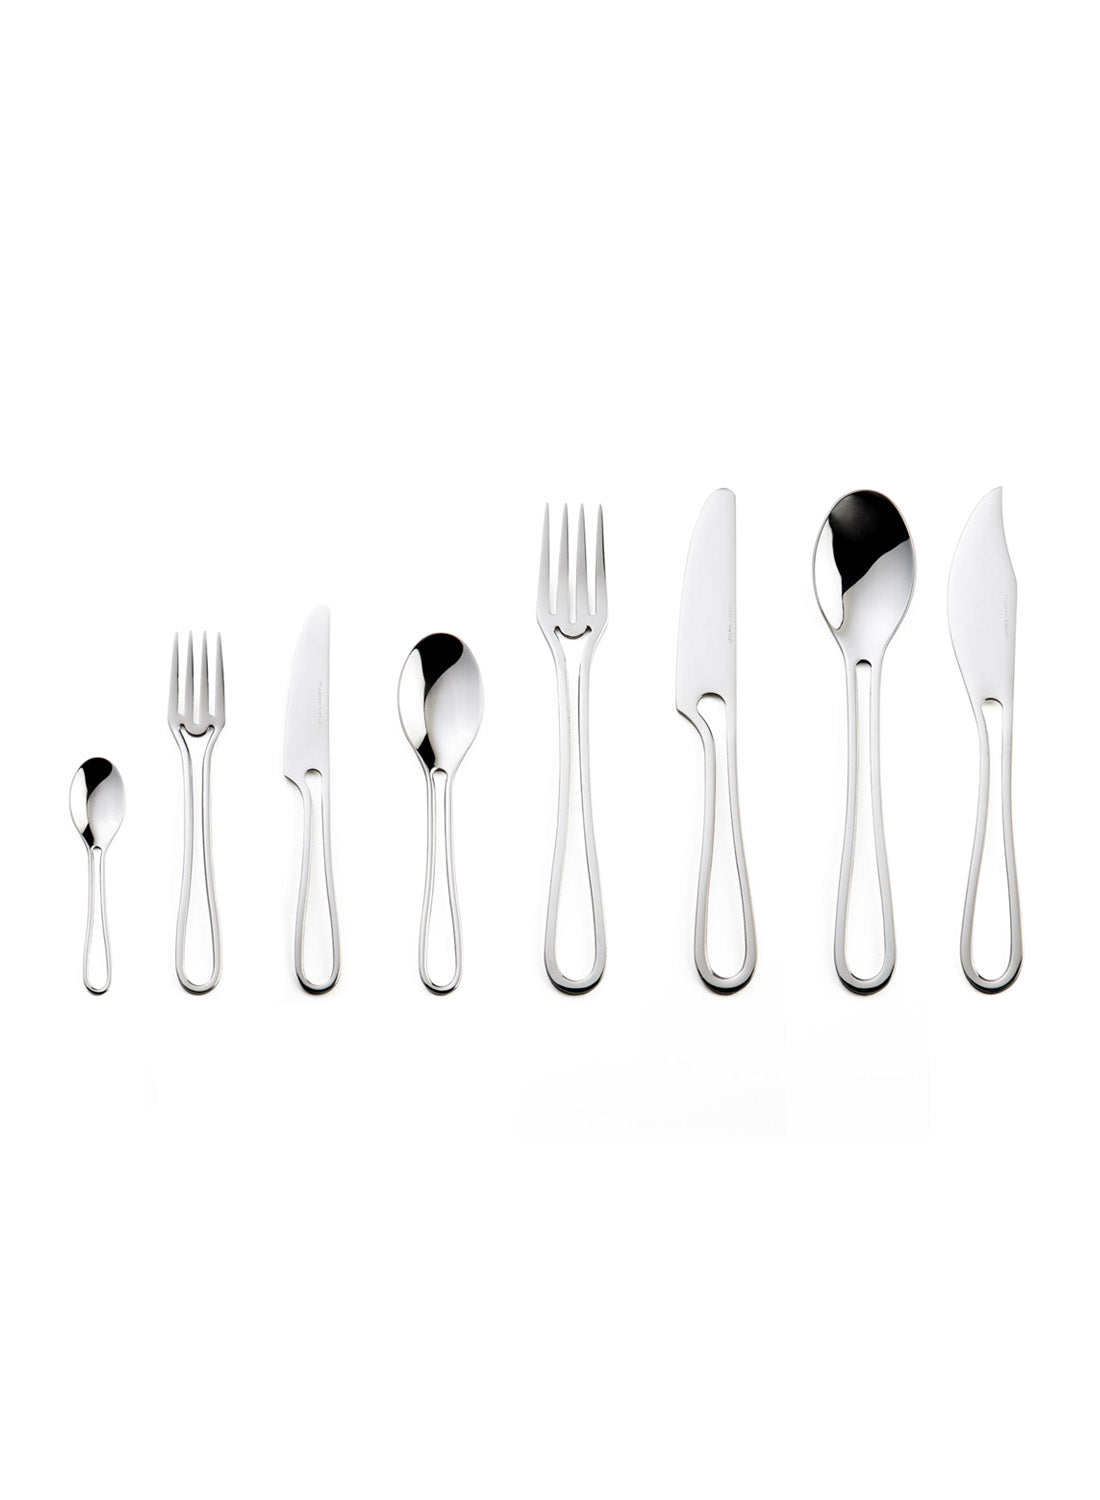 Maarten Baptist Outline Table Spoon - Polished Stainless Steel